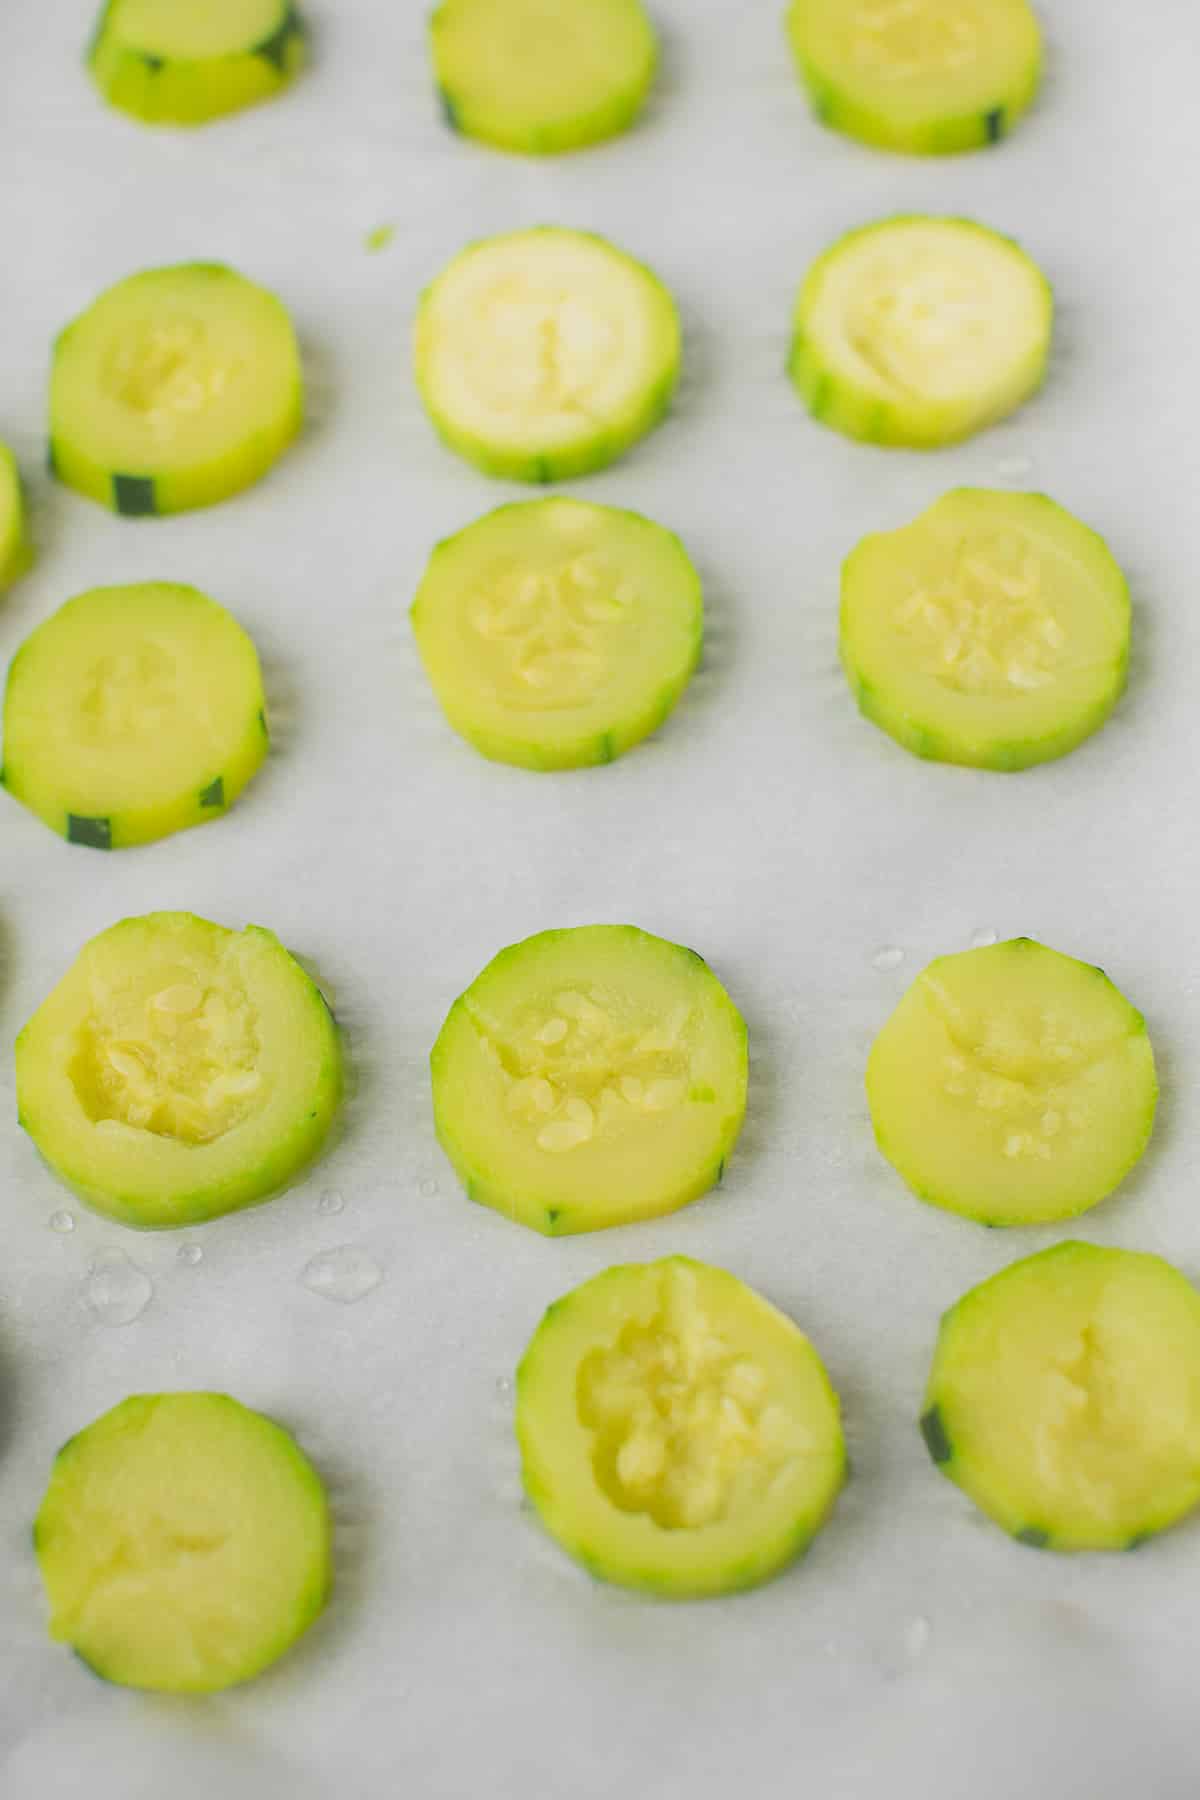 steamed zucchini slices for freezing.